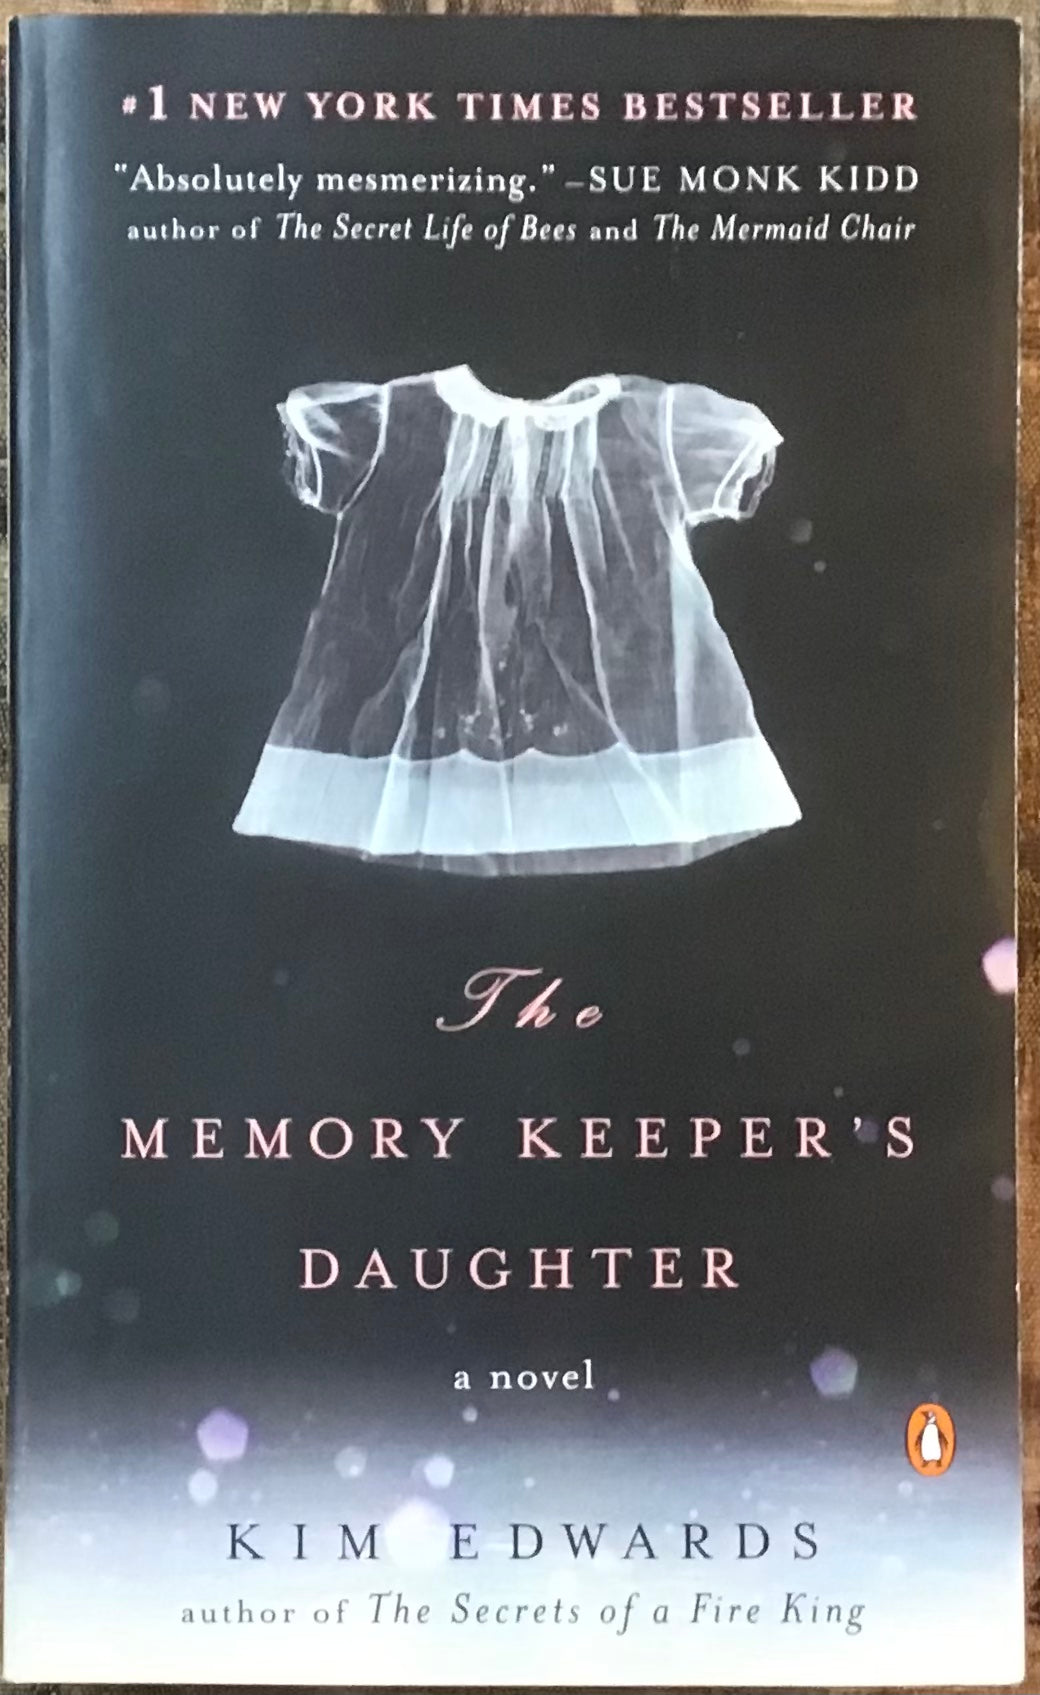 The Memory Keeper’s Daughter, Kim Edwards